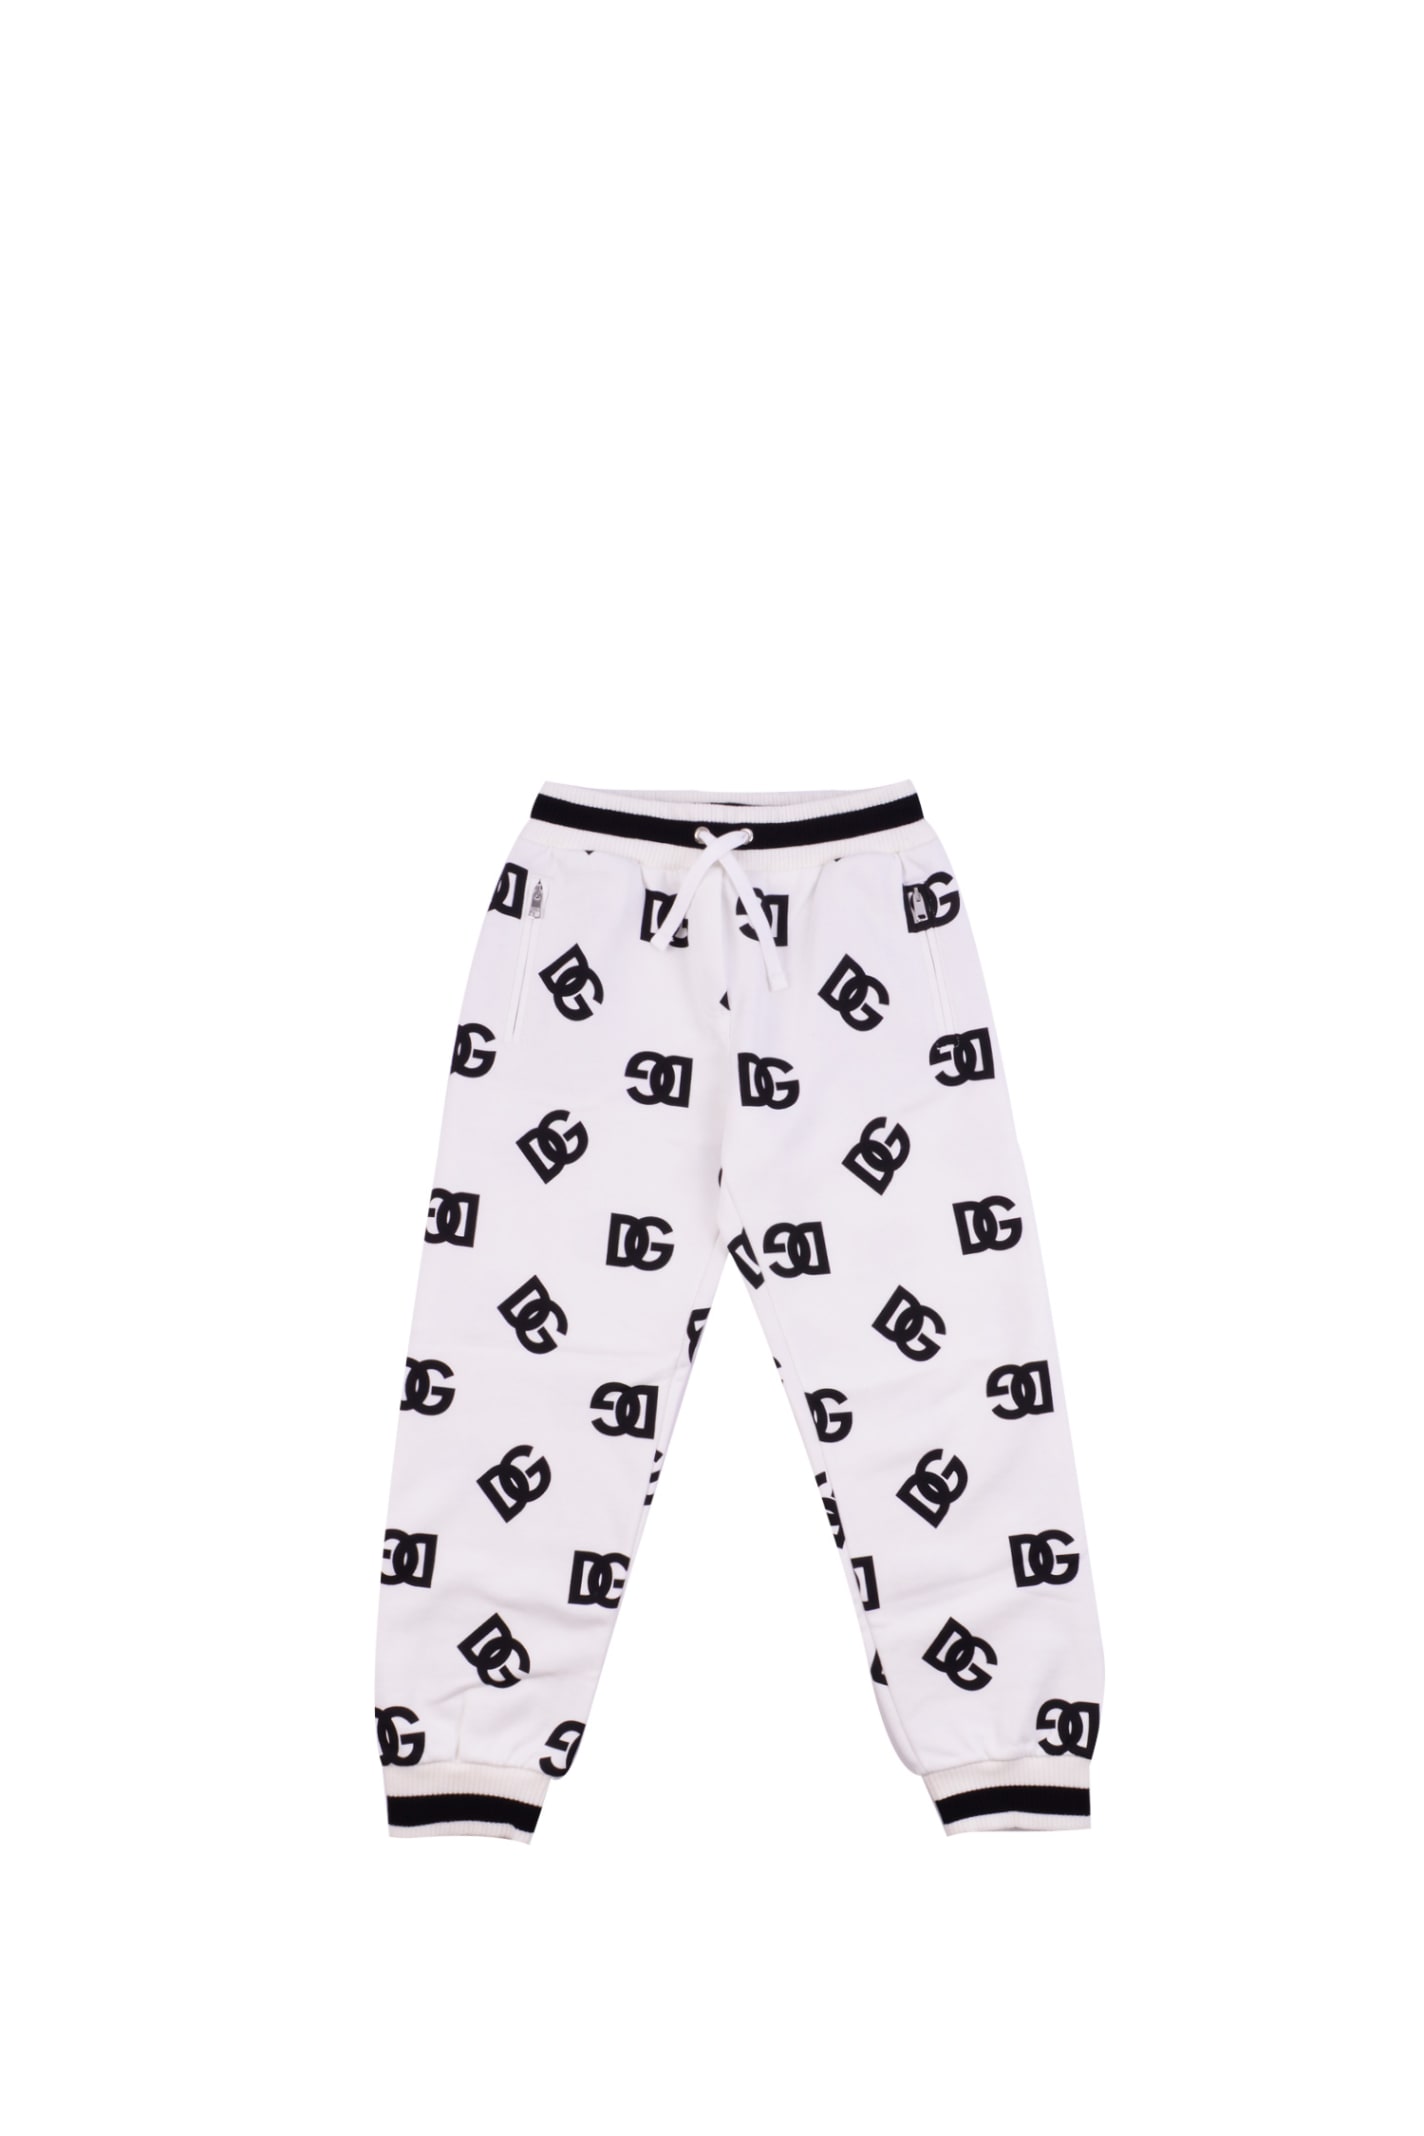 Dolce & Gabbana Cotton Trousers With Print